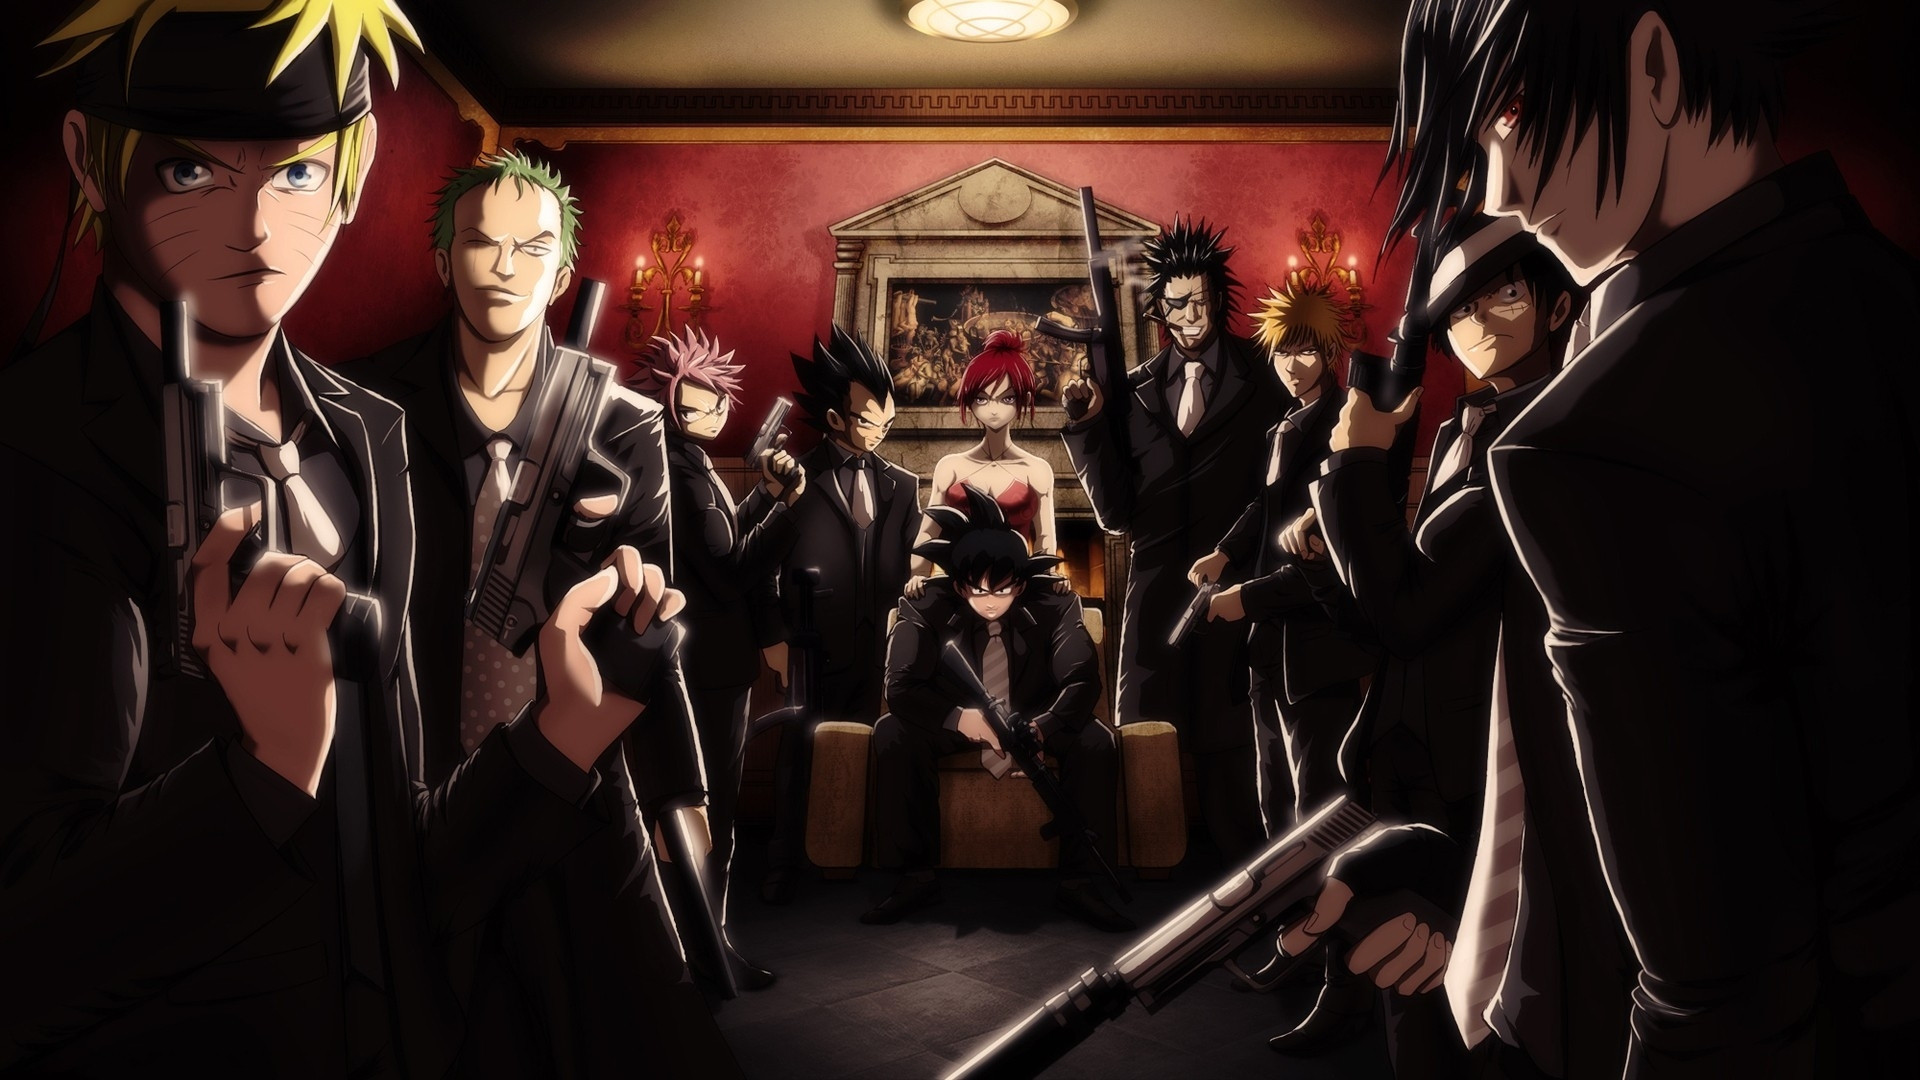 1920x1080 Awesome Anime Mobster Wallpaper